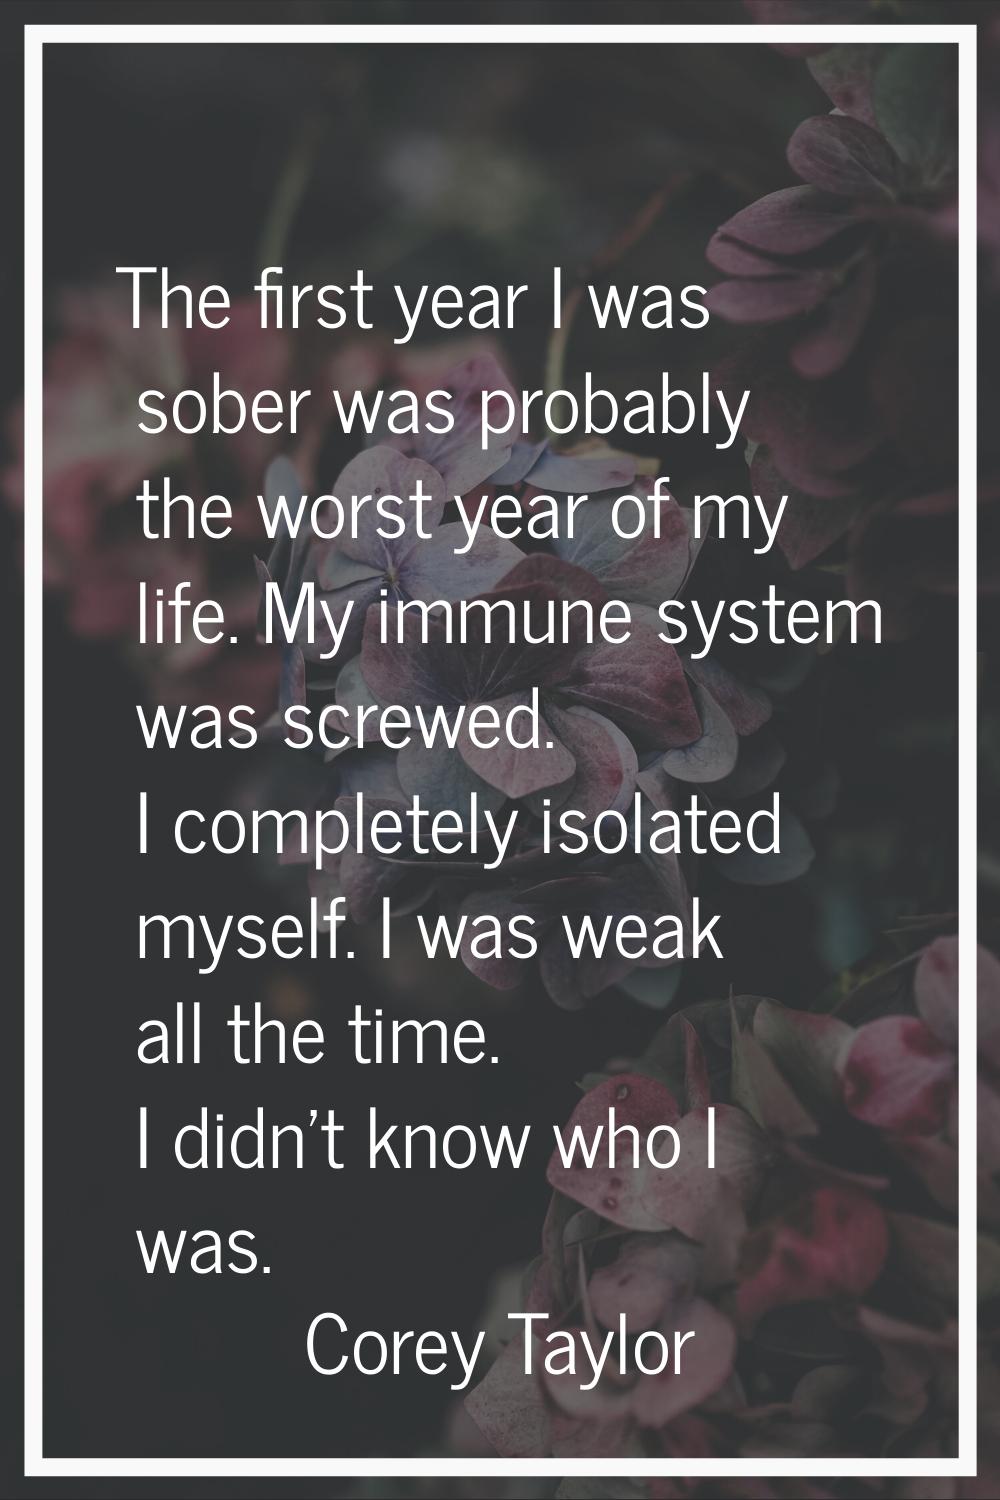 The first year I was sober was probably the worst year of my life. My immune system was screwed. I 